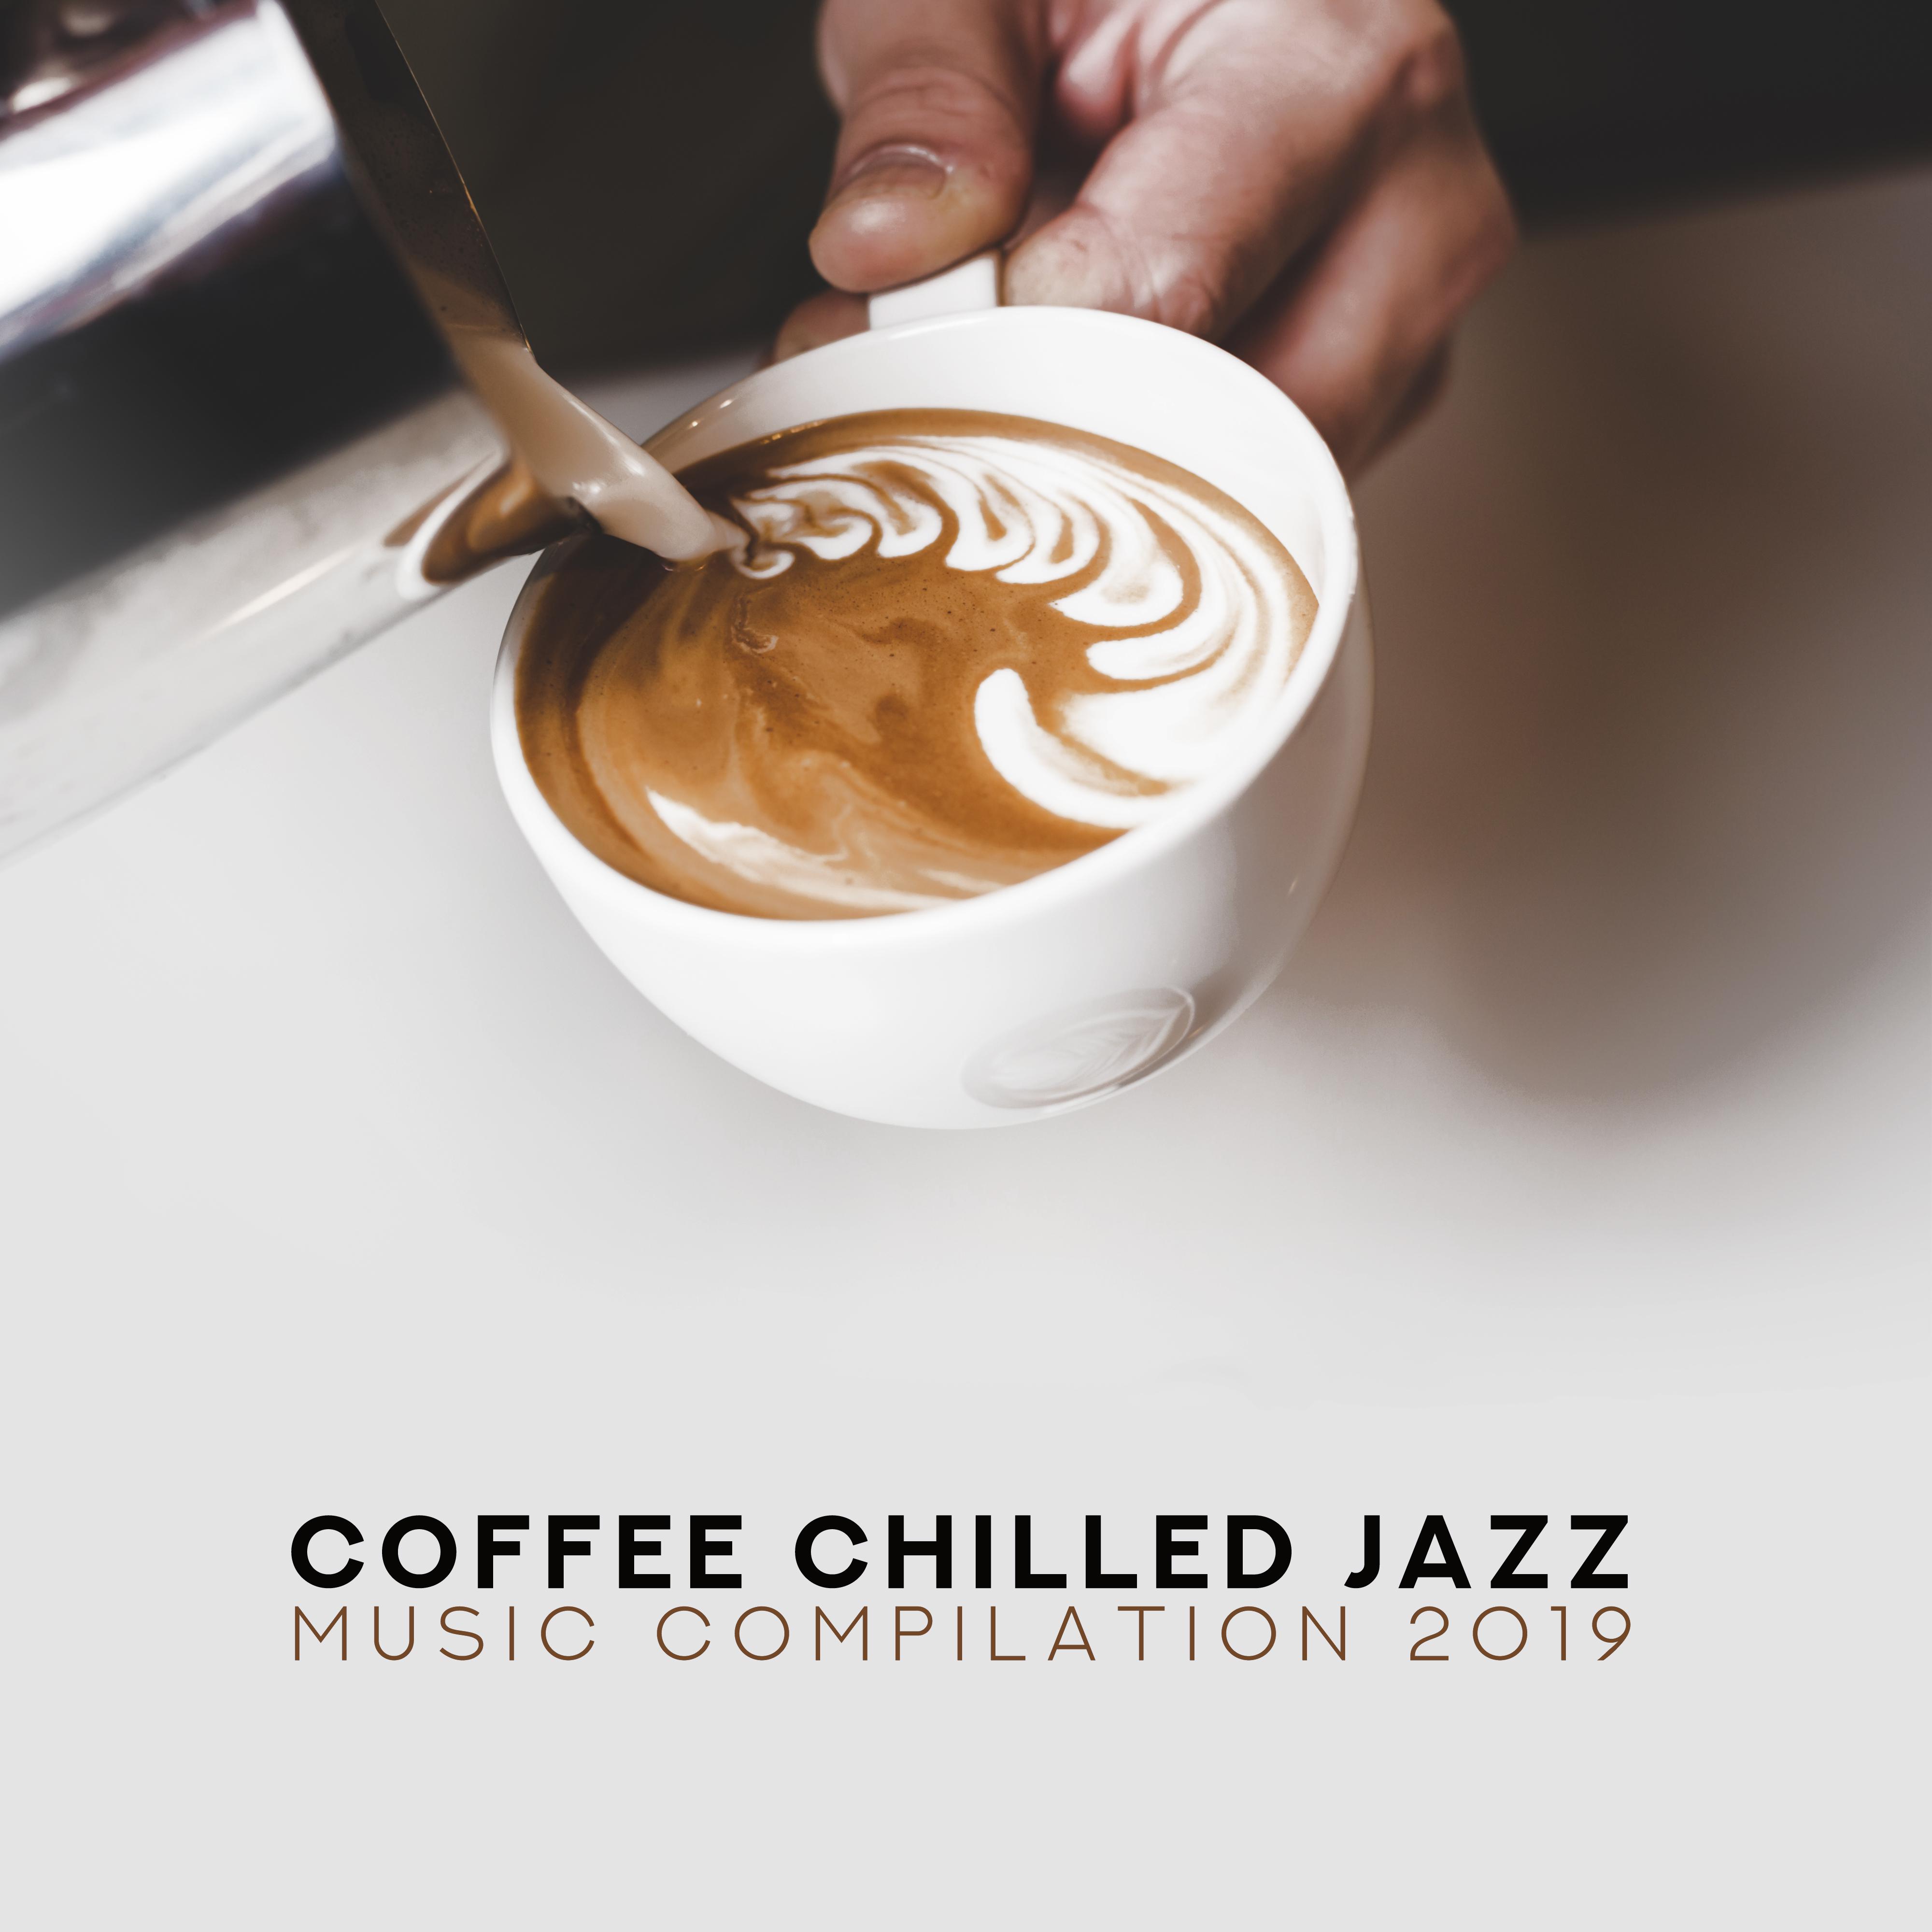 Coffee Chilled Jazz Music Compilation 2019